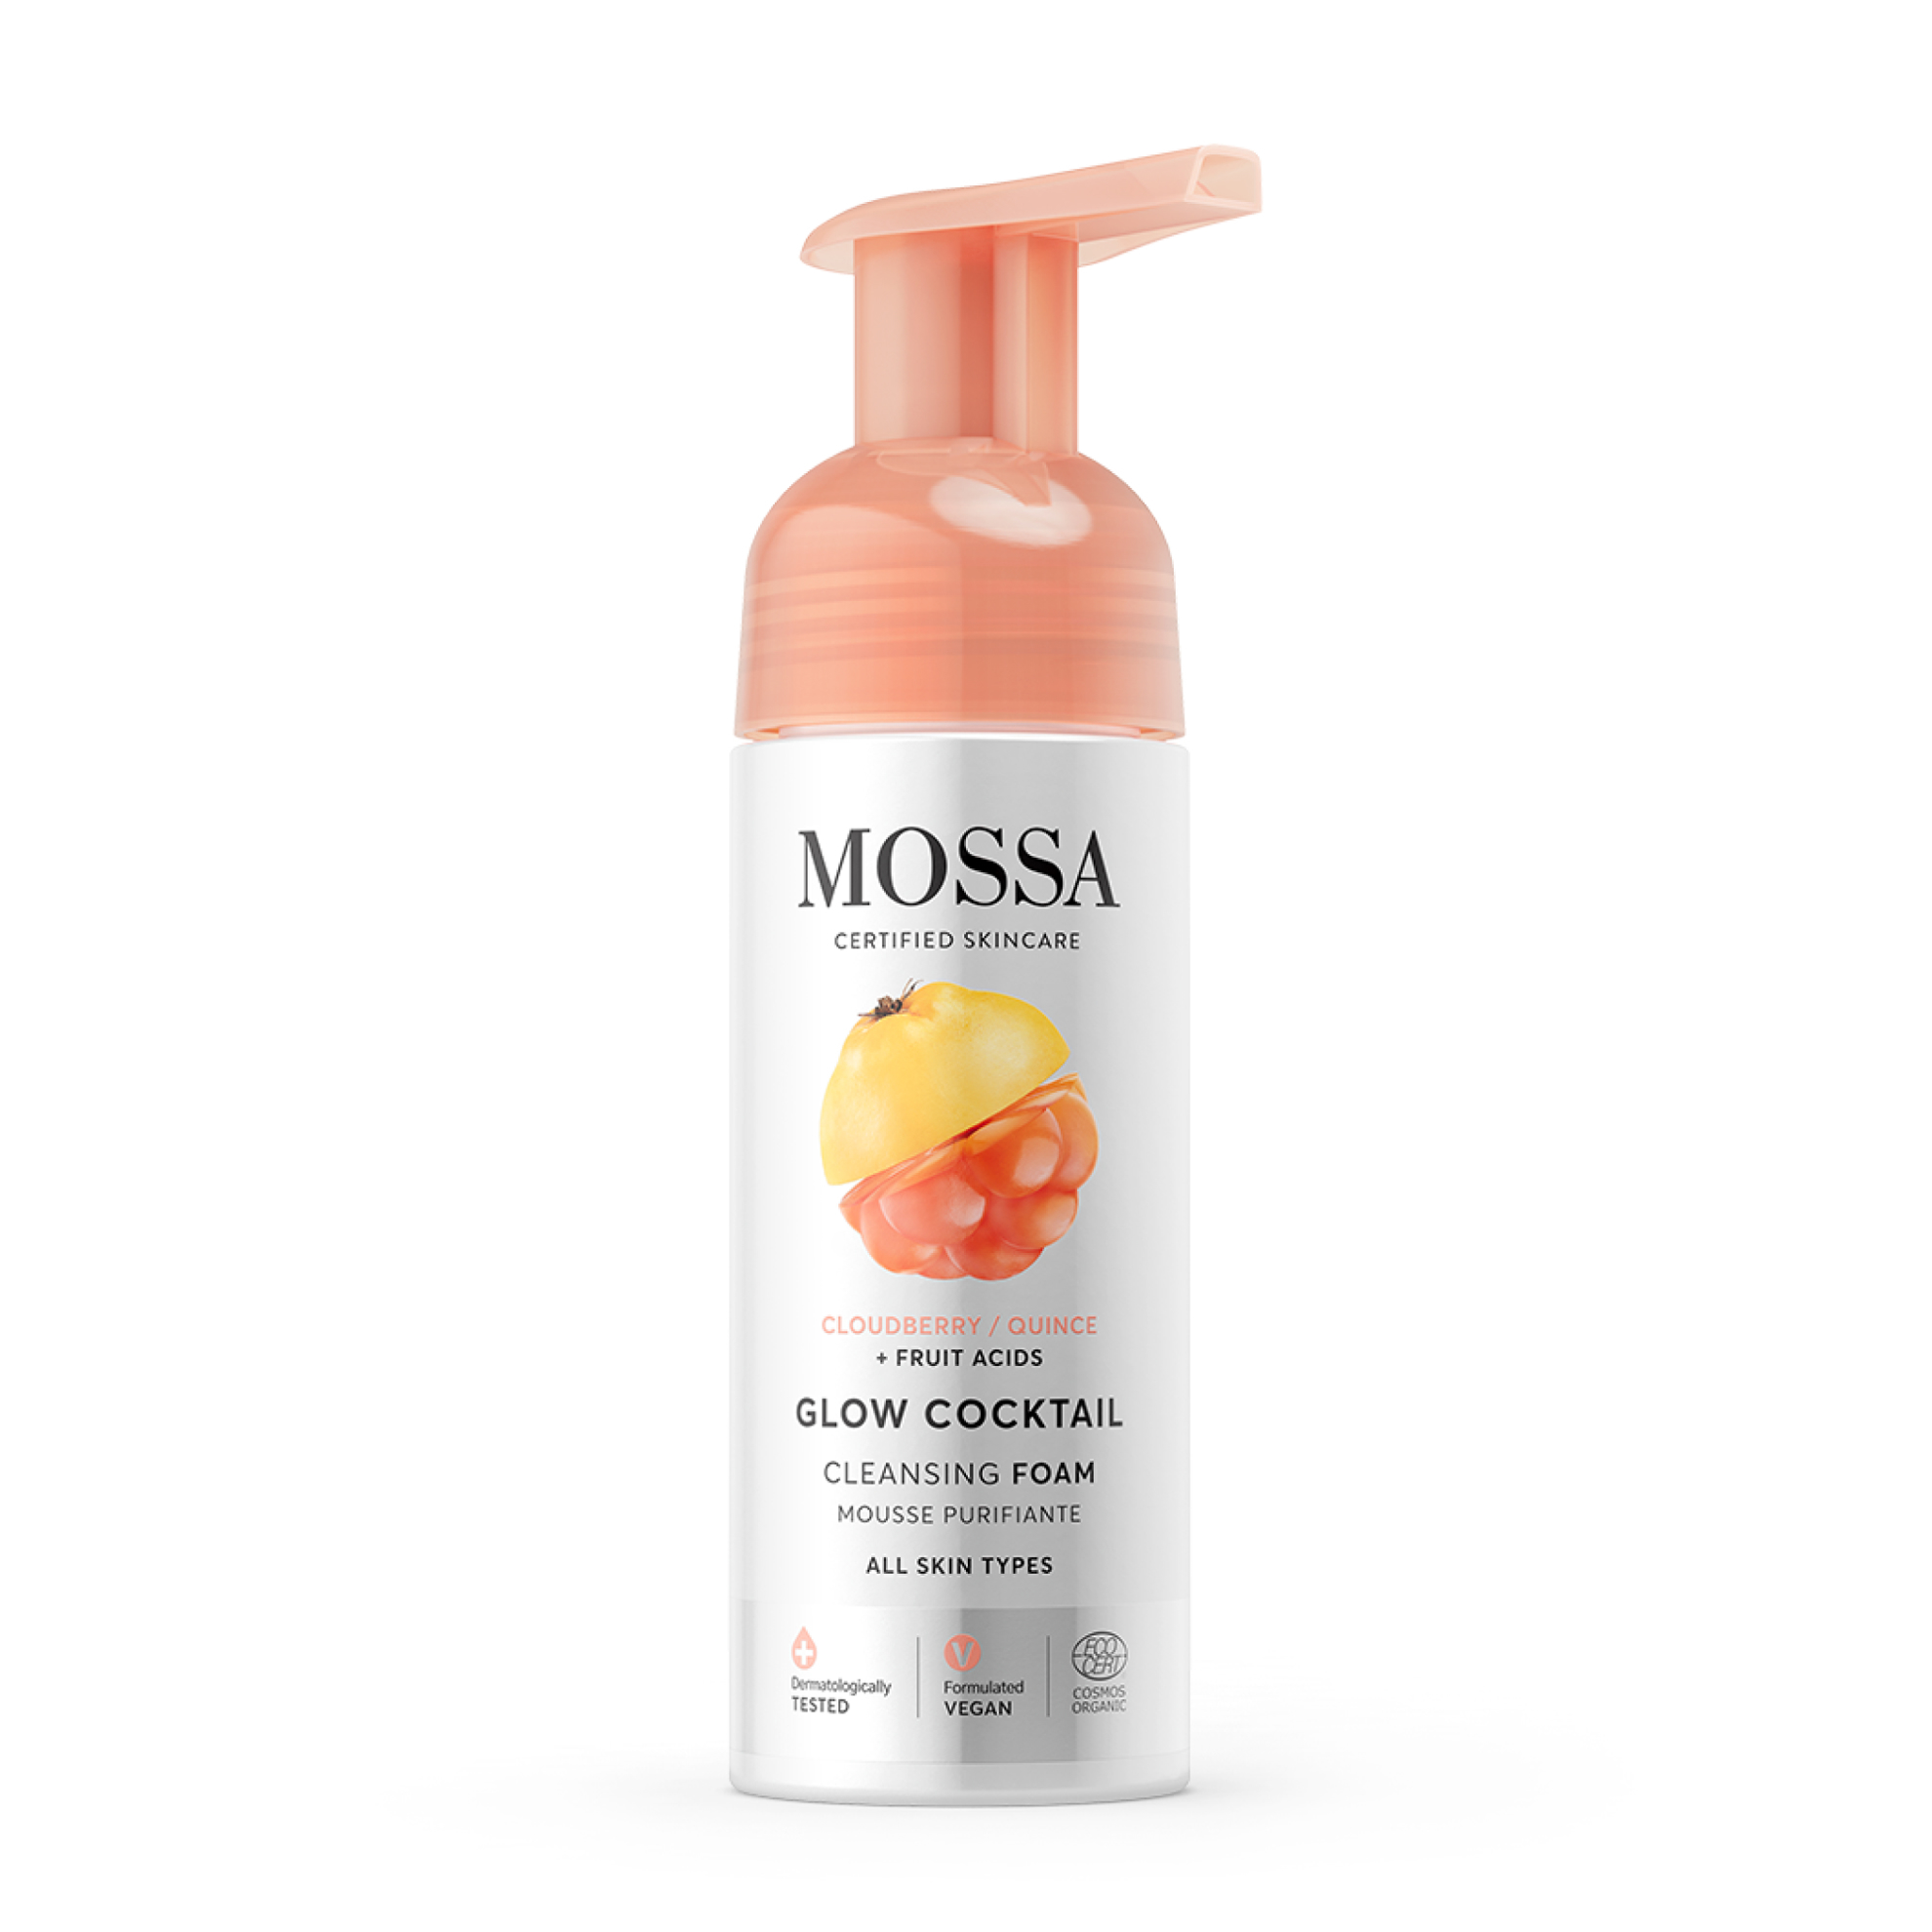 MOSSA - GLOW COCKTAIL Cleansing Foam